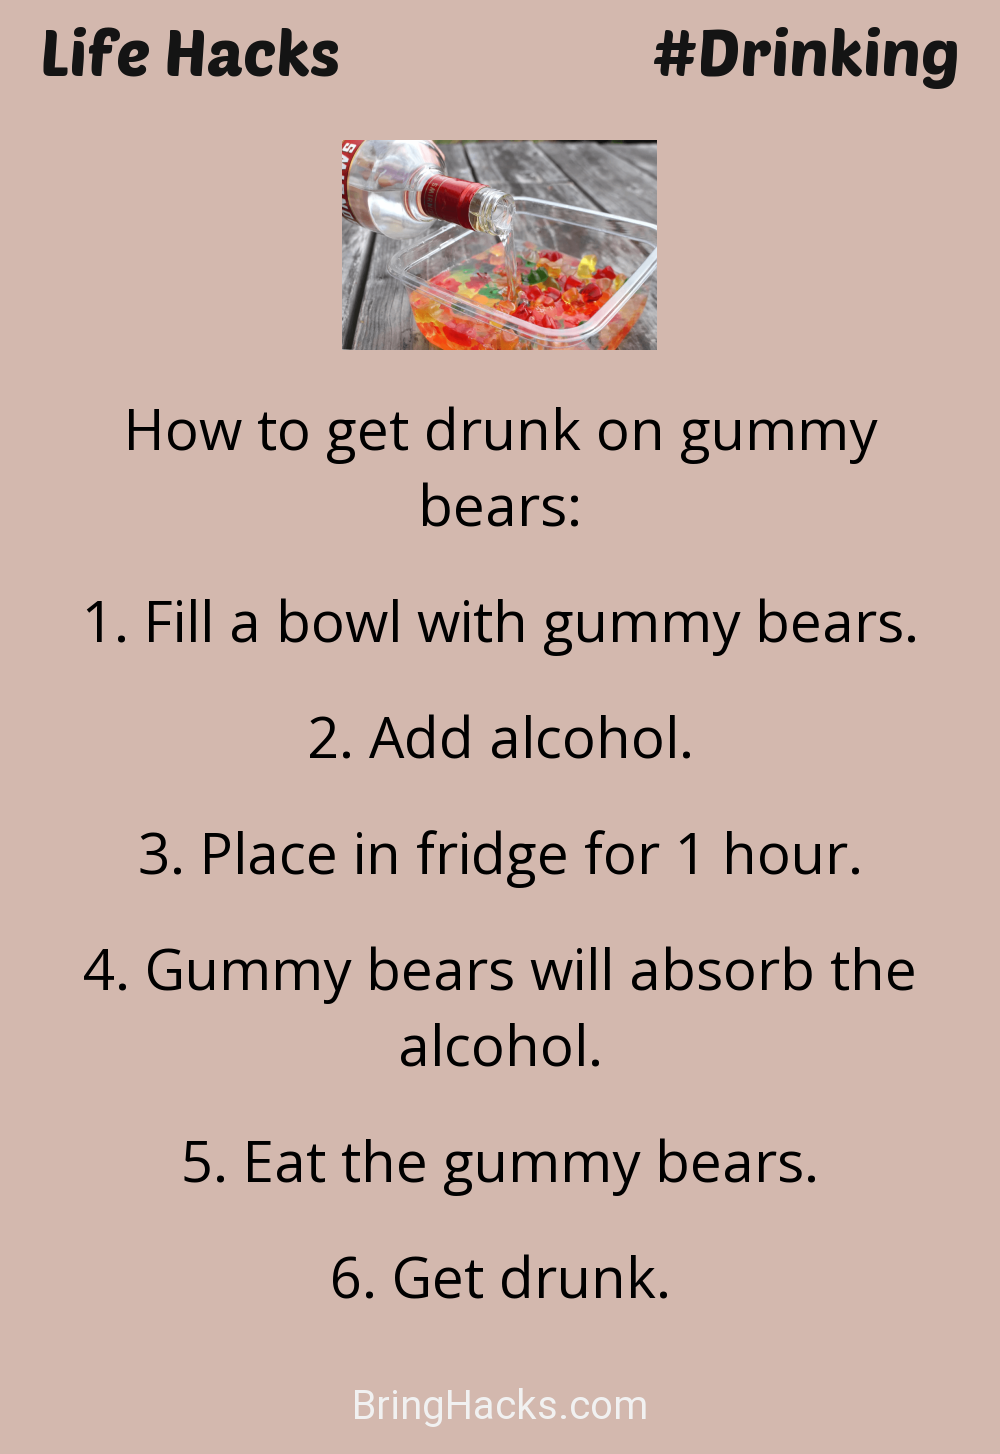 Life Hacks: - How to get drunk on gummy bears:
Fill a bowl with gummy bears.Add alcohol.Place in fridge for 1 hour.Gummy bears will absorb the alcohol.Eat the gummy bears.Get drunk.